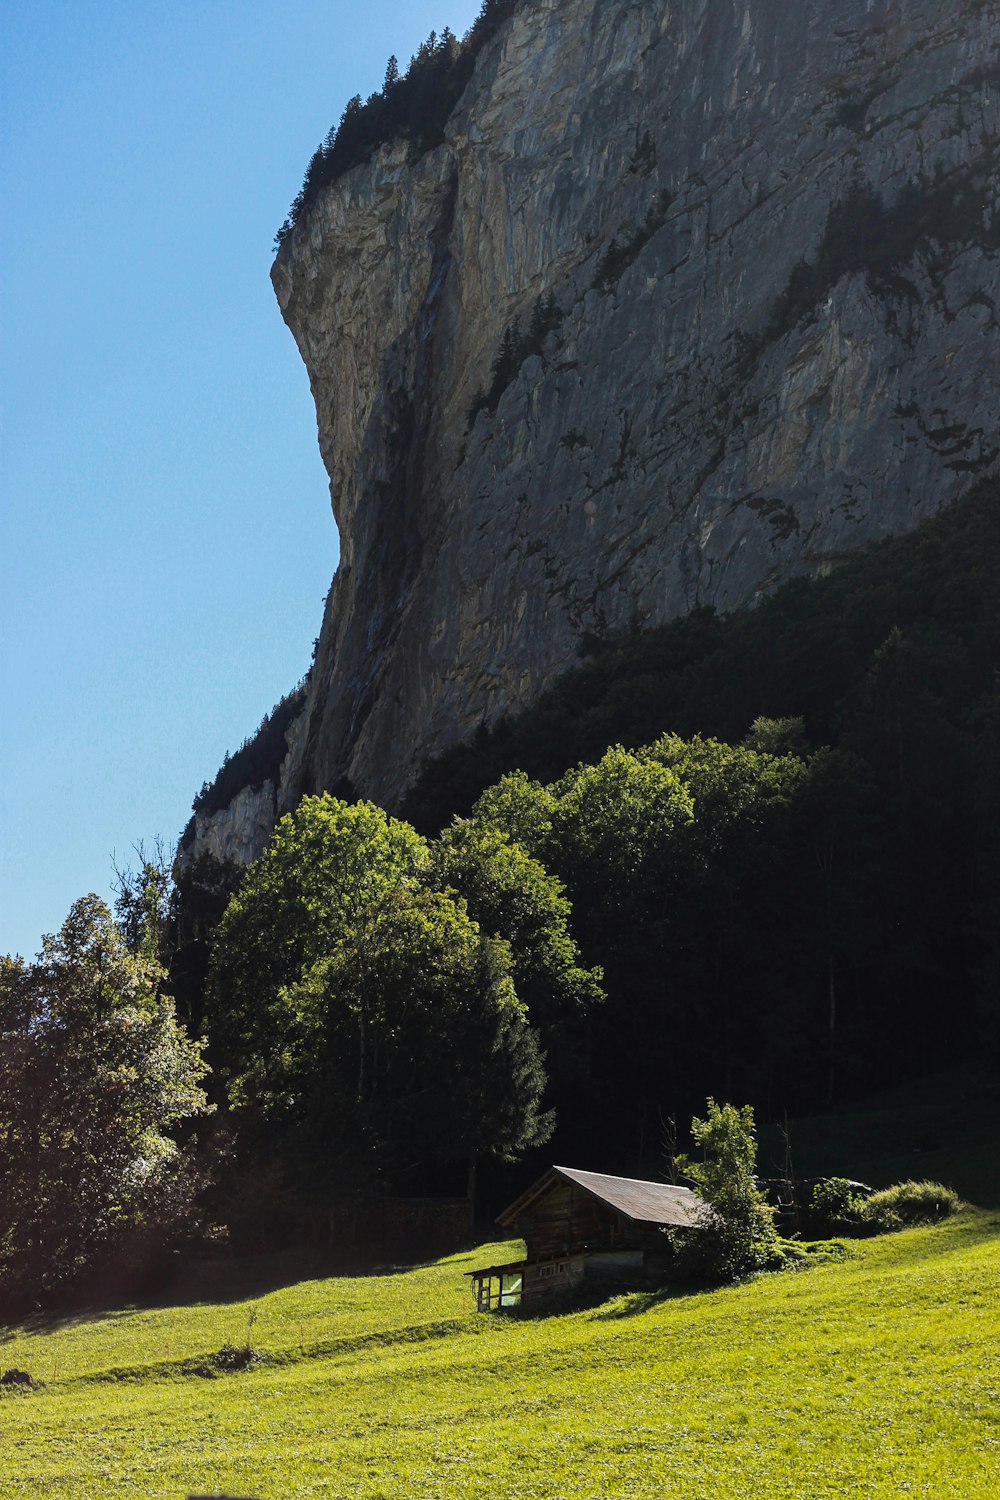 a small house in front of a large rock cliff